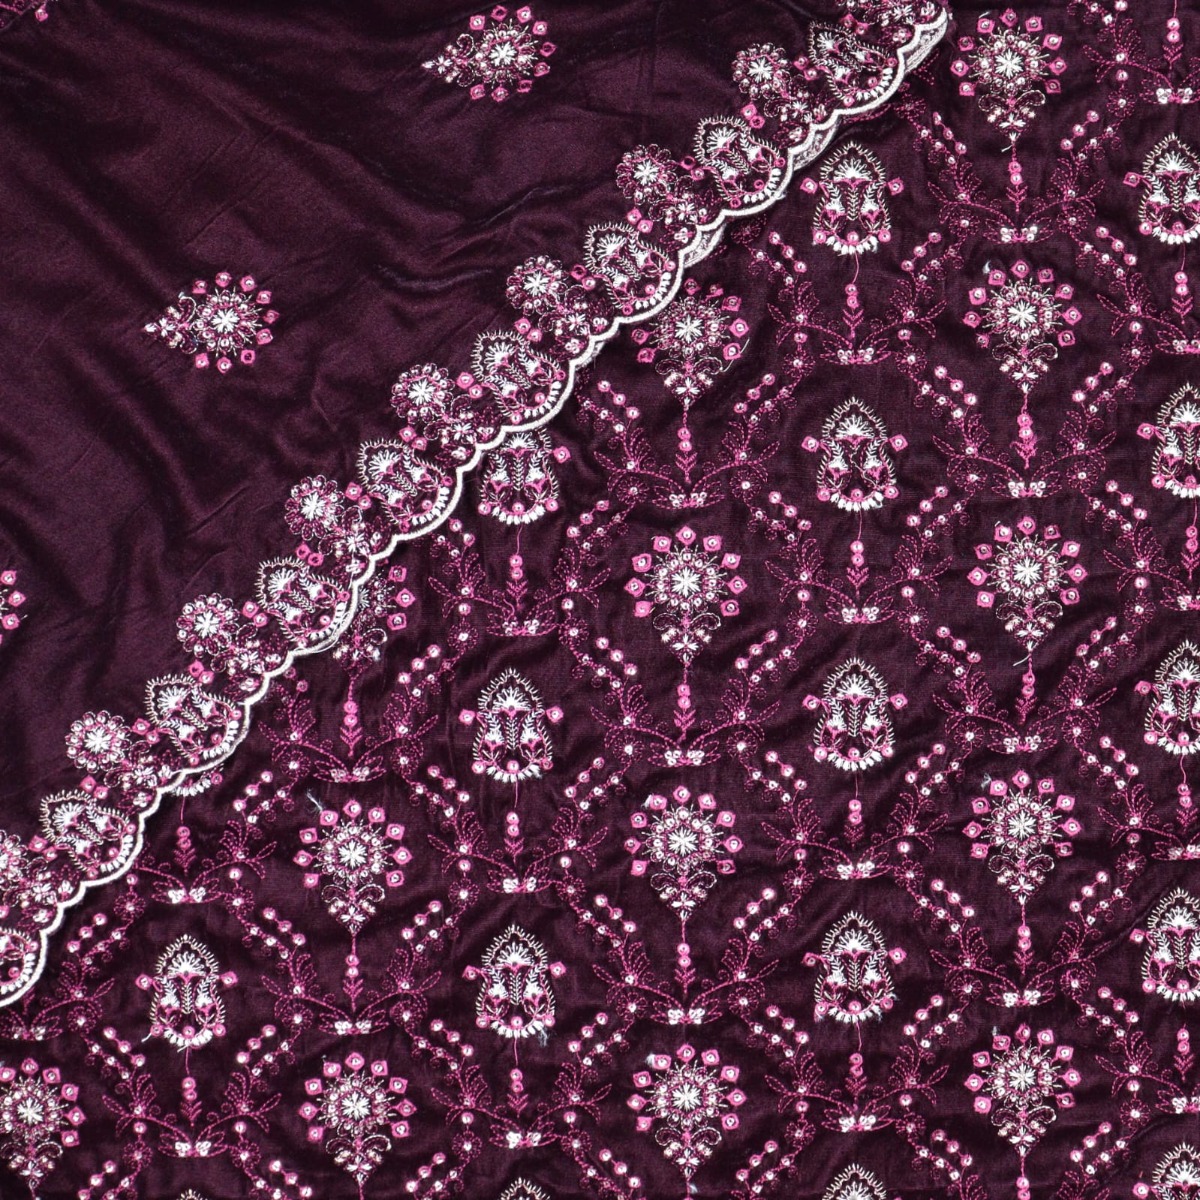 Signature Chapter 05 Unstitched Luxury Embroidered Velvet Series  - Design 07